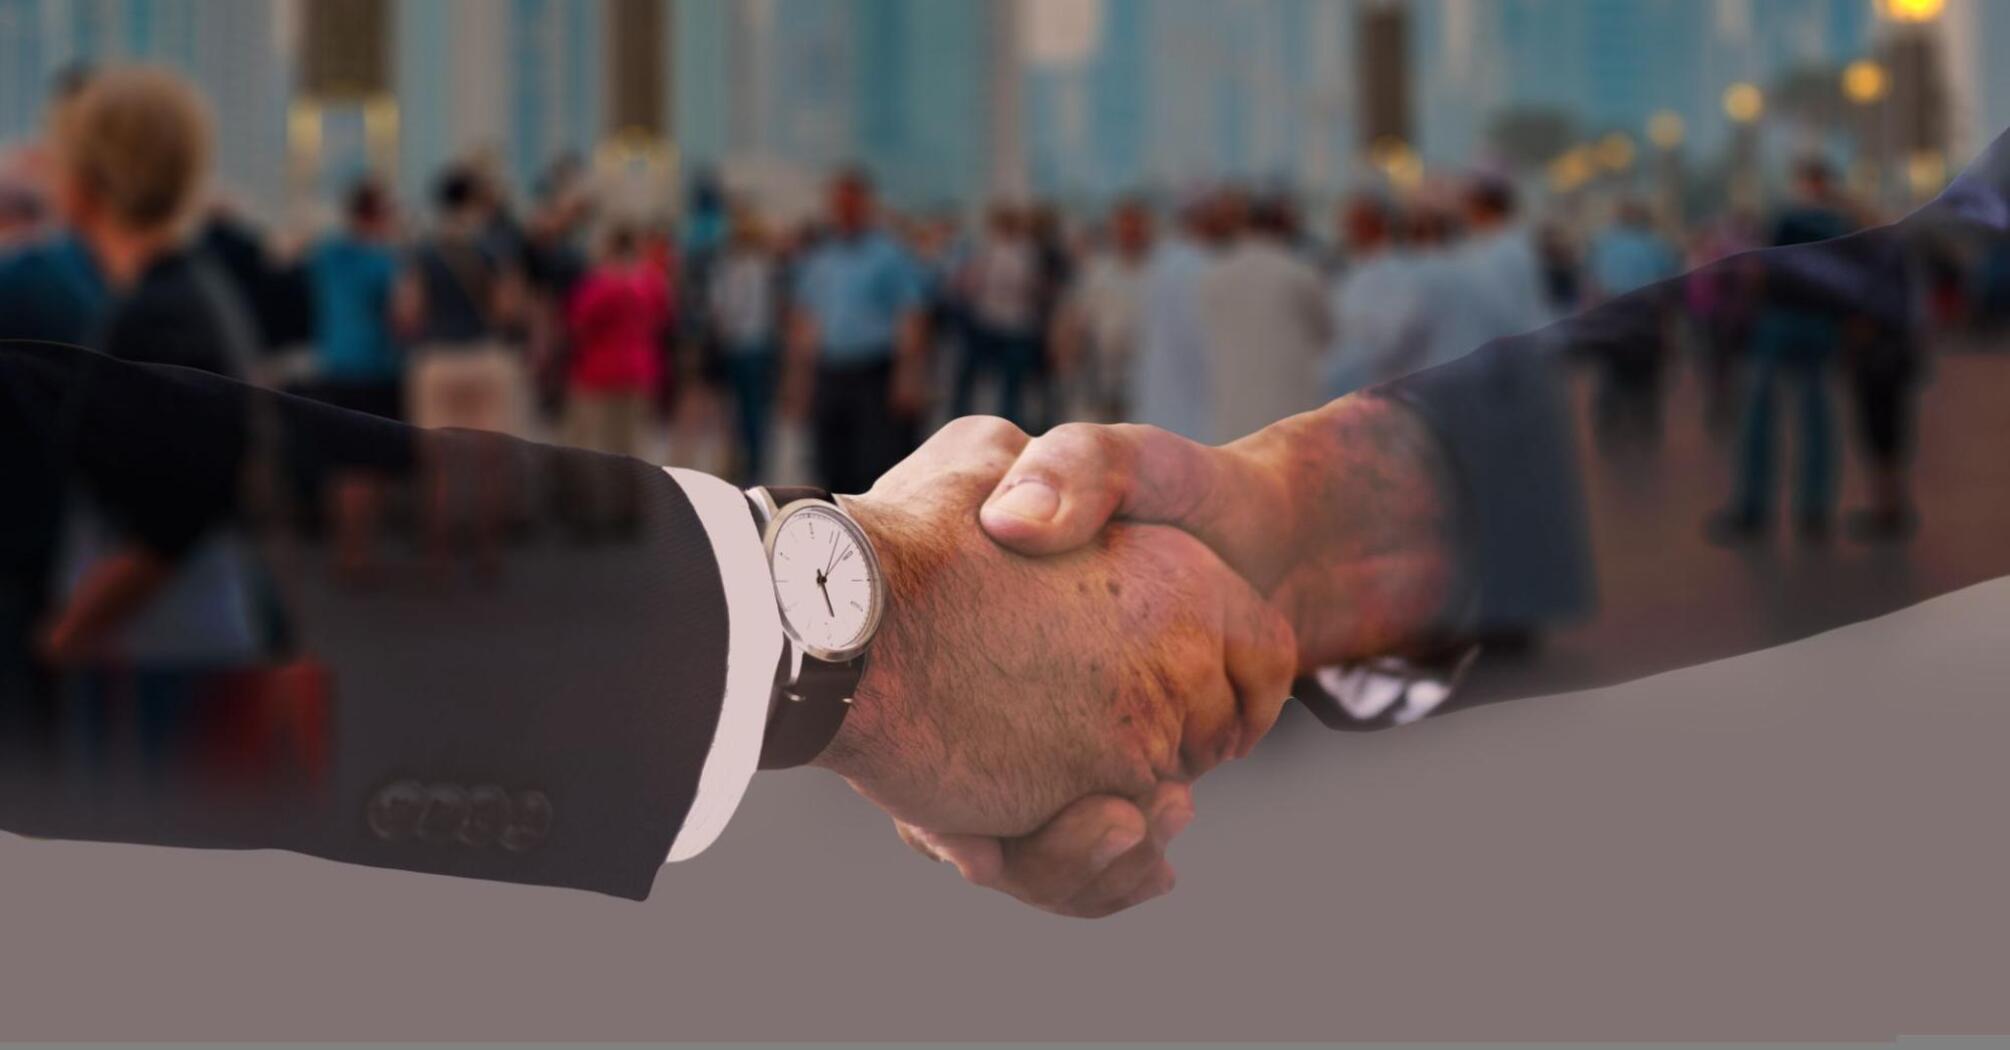 Handshake of two men against the backdrop of city bustle